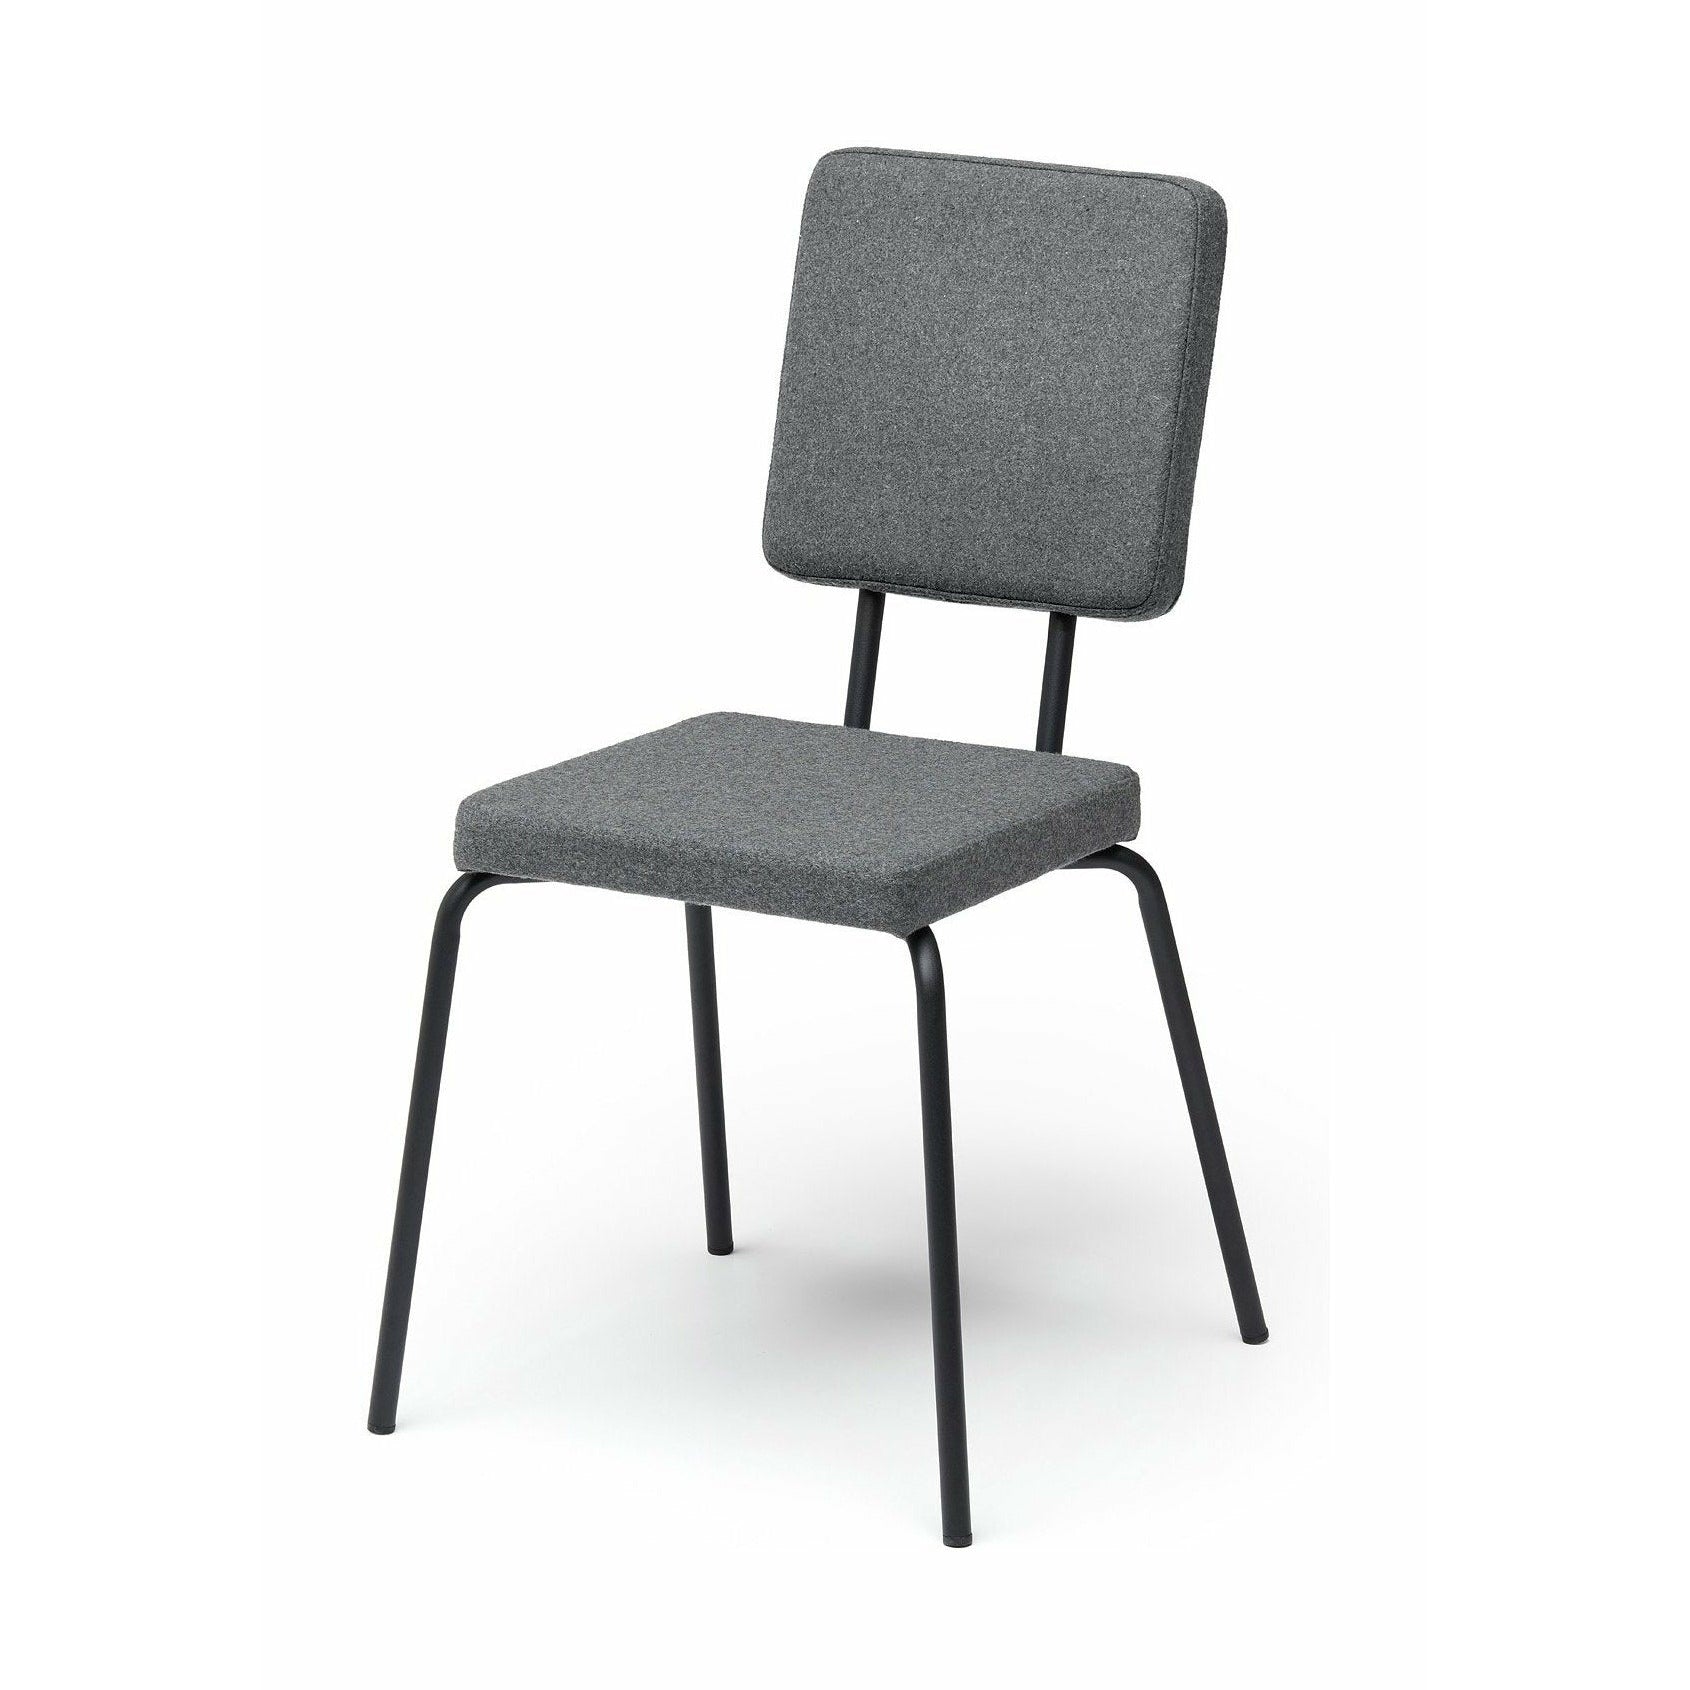 Puik Option Chair Seat And Backrest Square, Light Grey